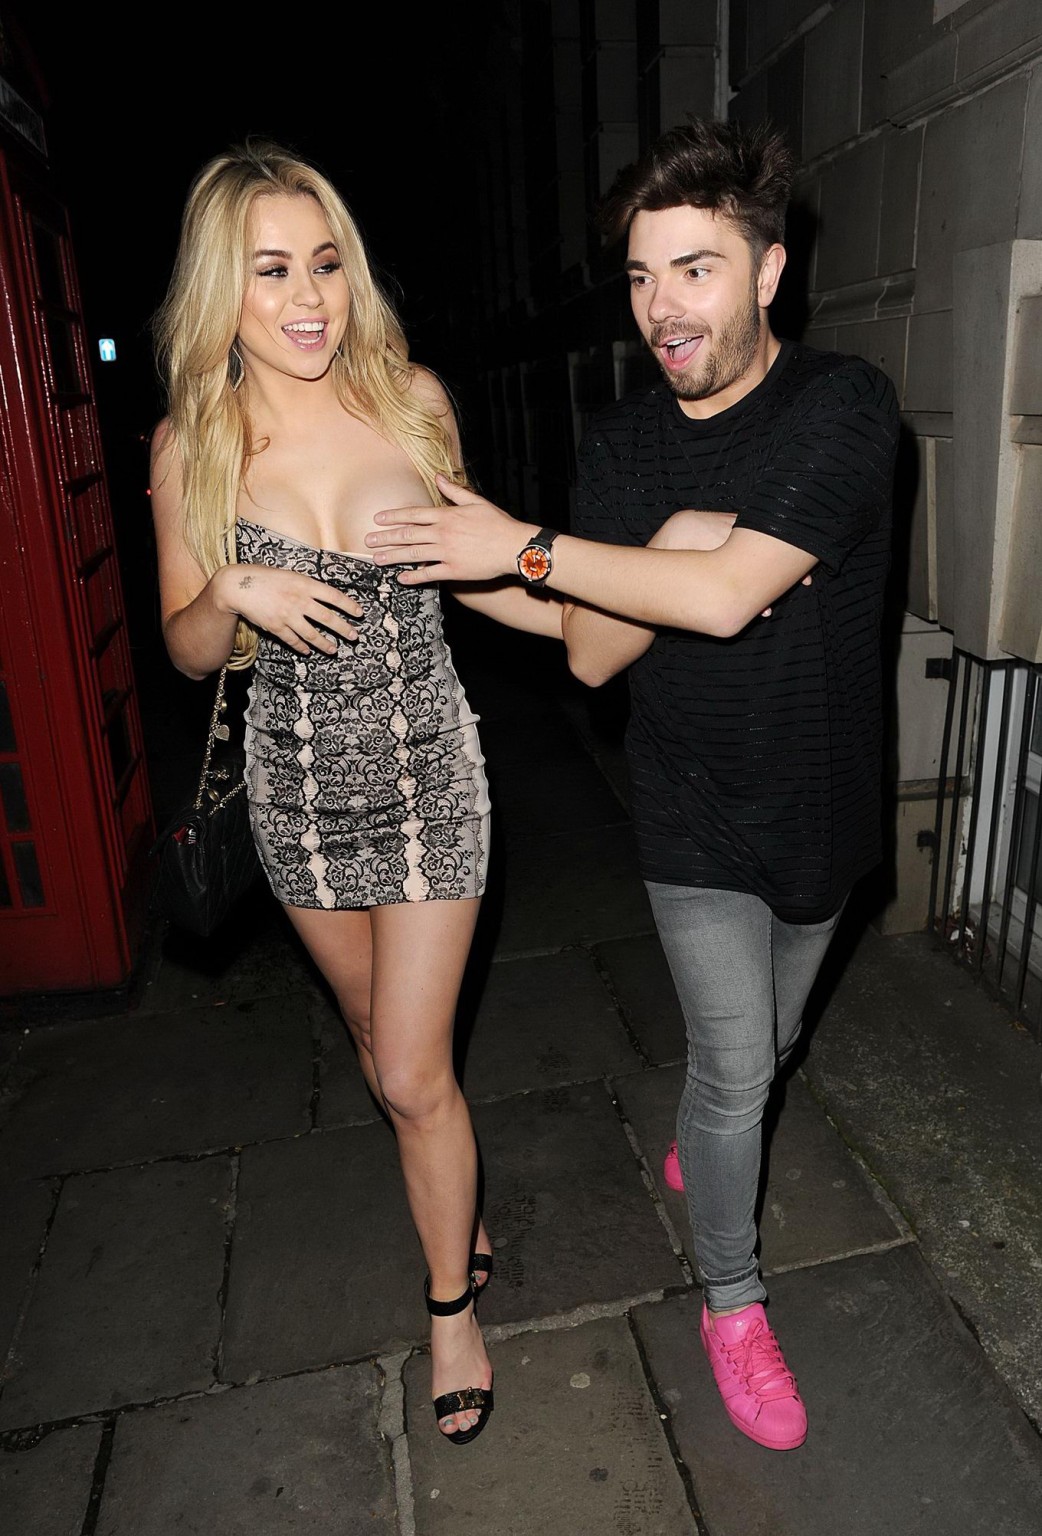 Melissa Reeves showing off her boobs and bare ass on a drunken night out in Manc #75164741